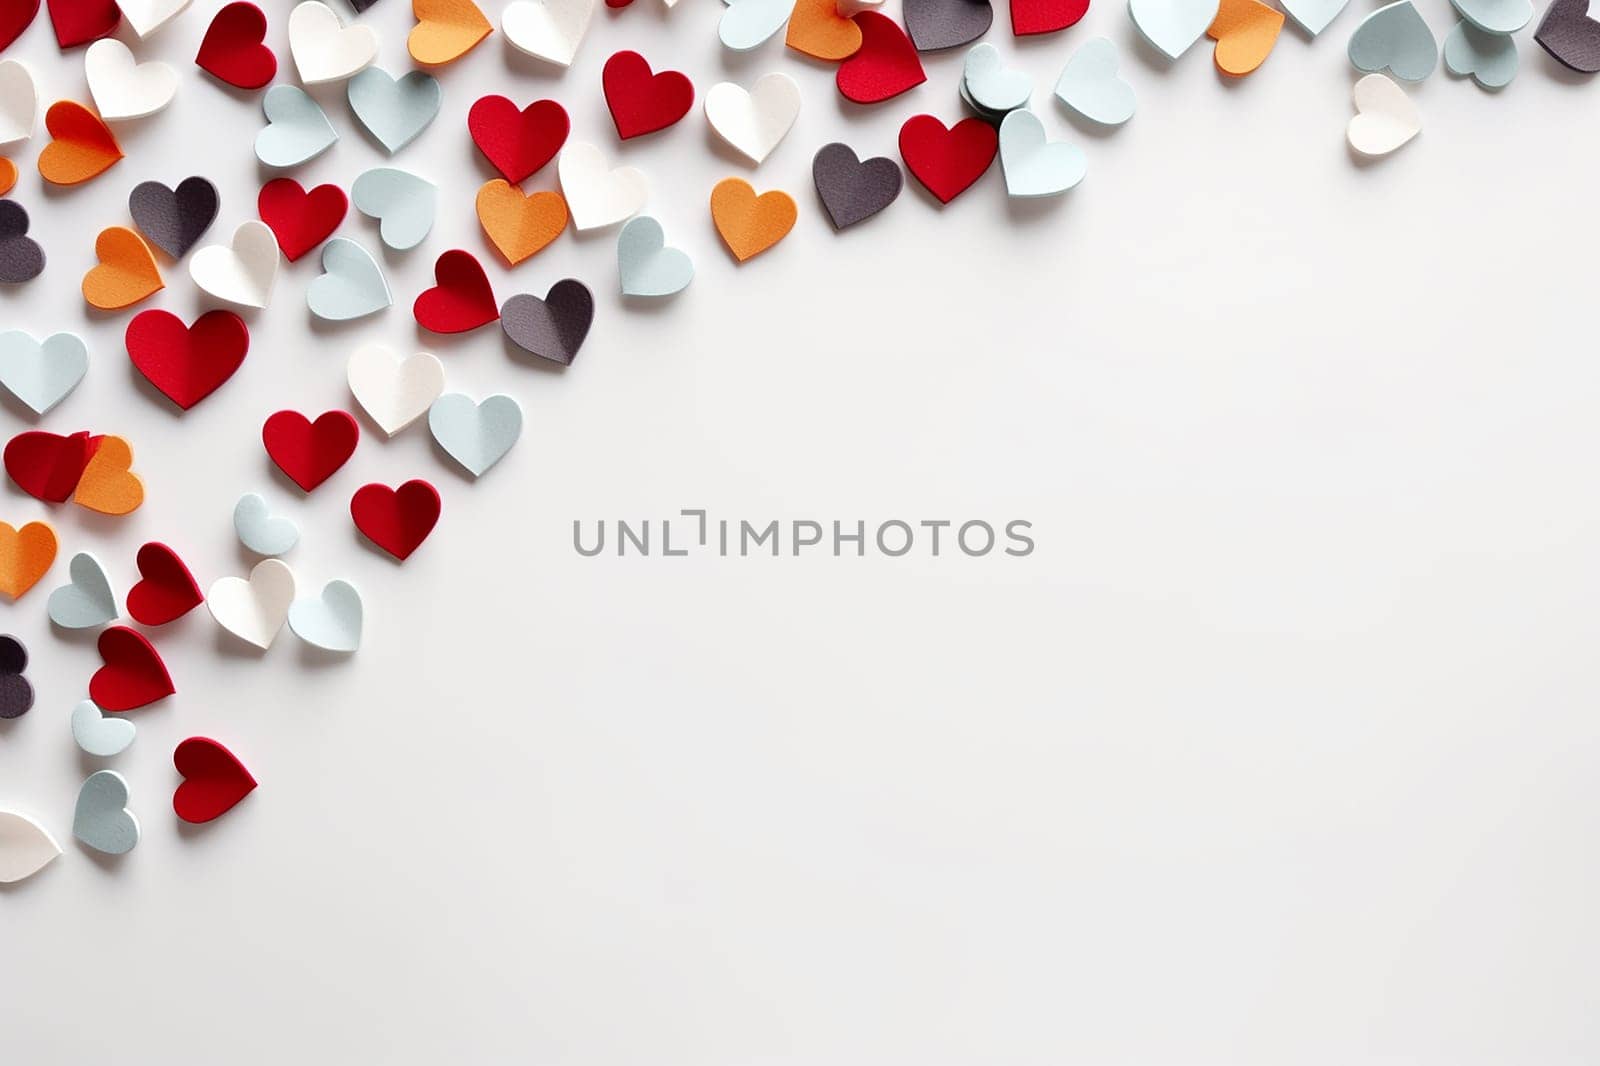 Assorted paper hearts spread in a corner on a white background.